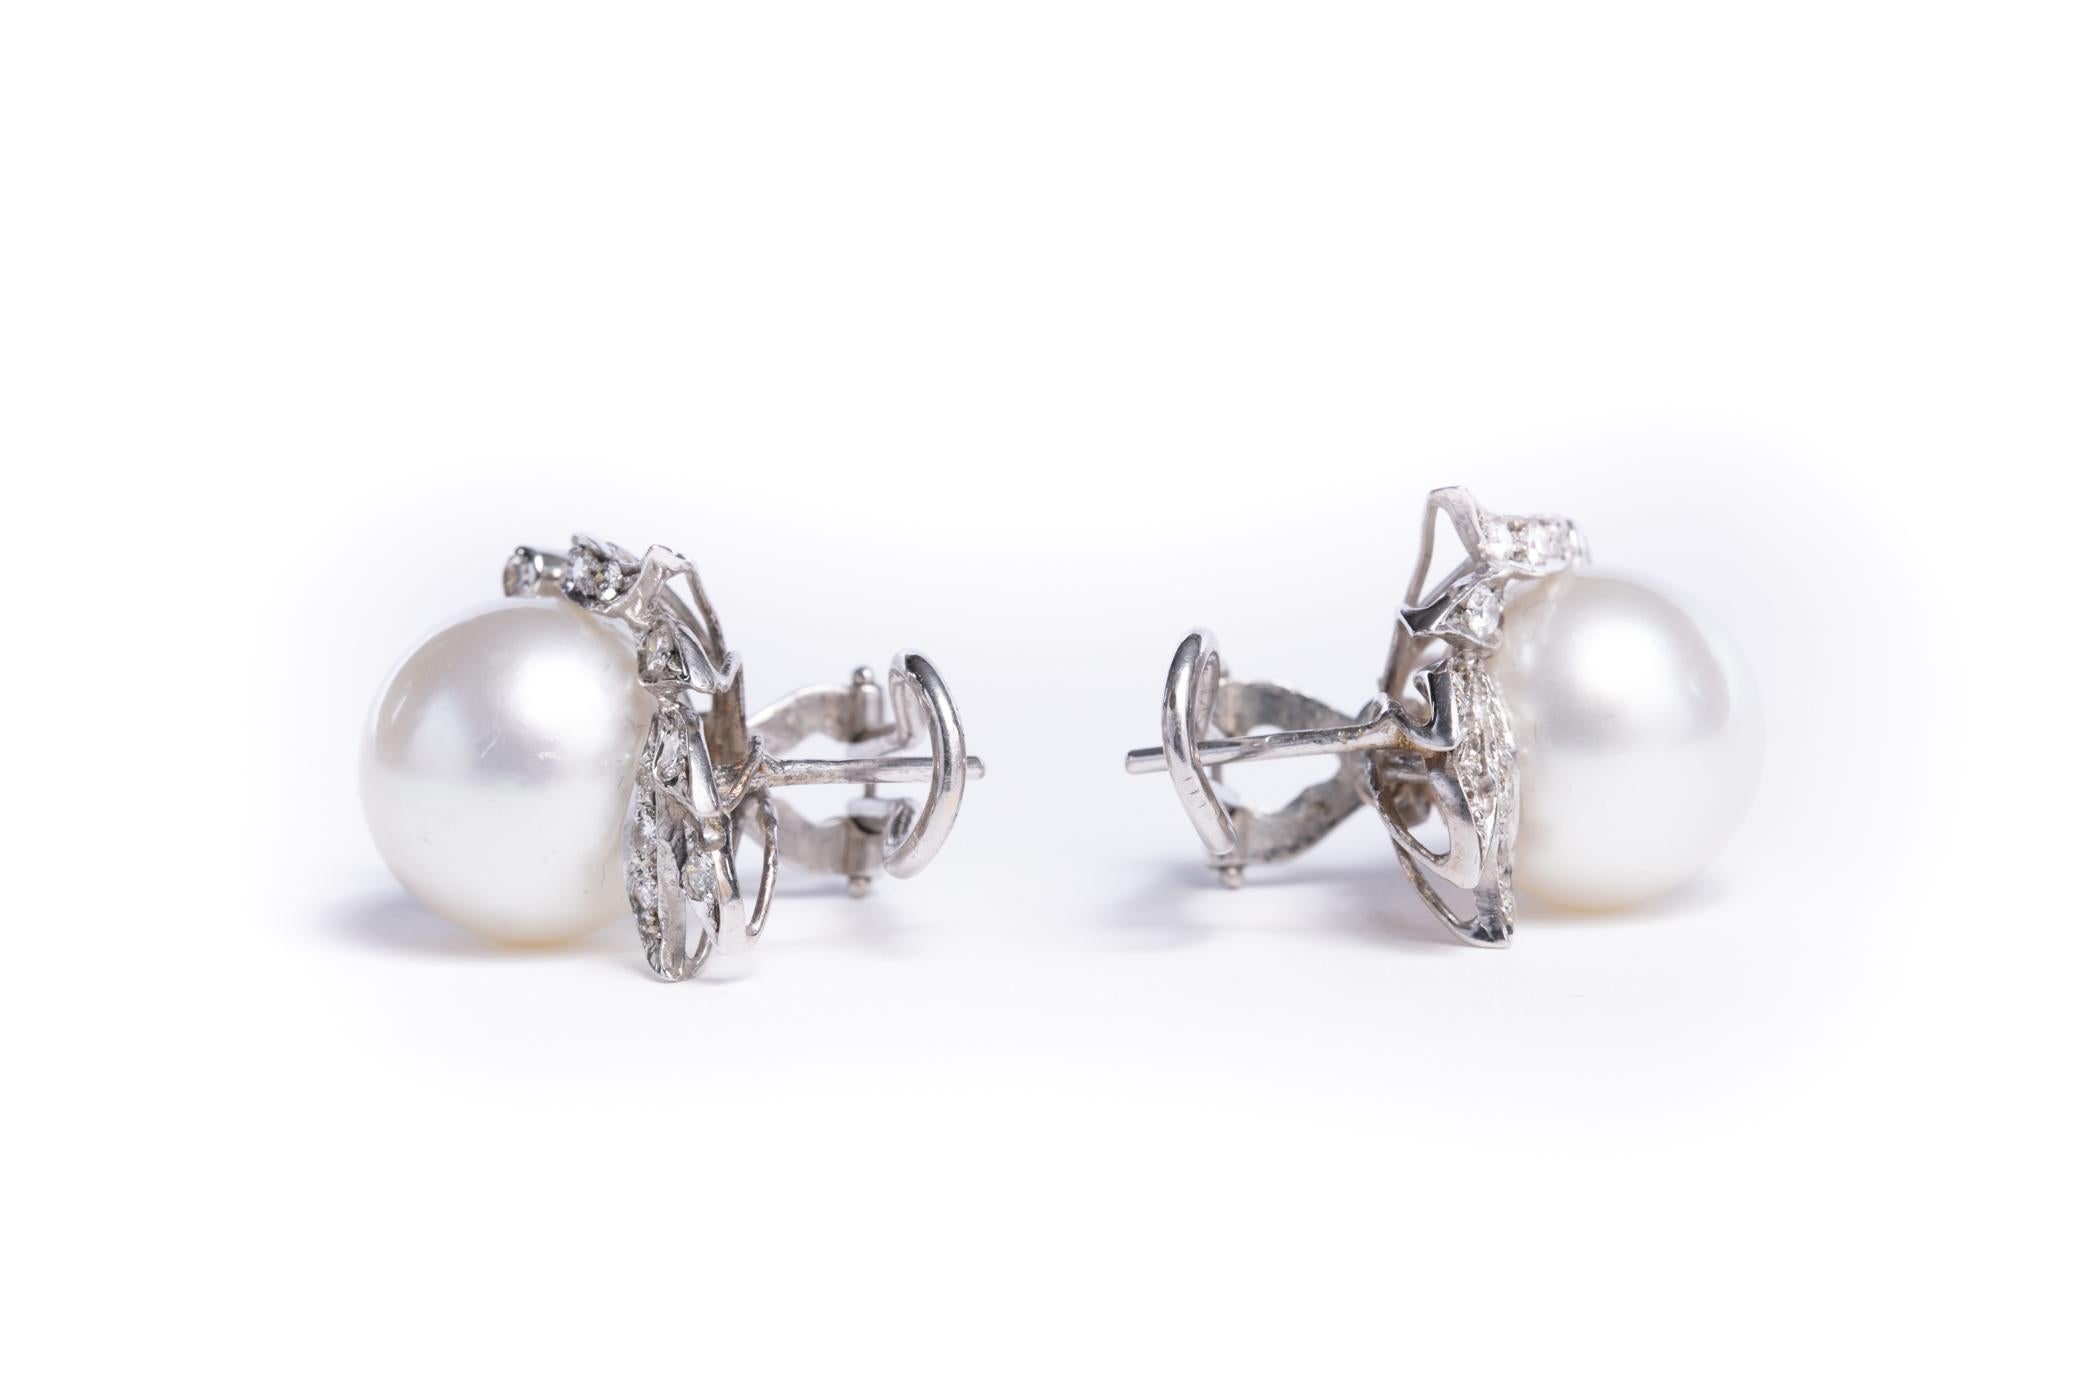 Modern Cultured Pearl and Diamond Earrings Set in 18 Karat White Gold and Diamonds